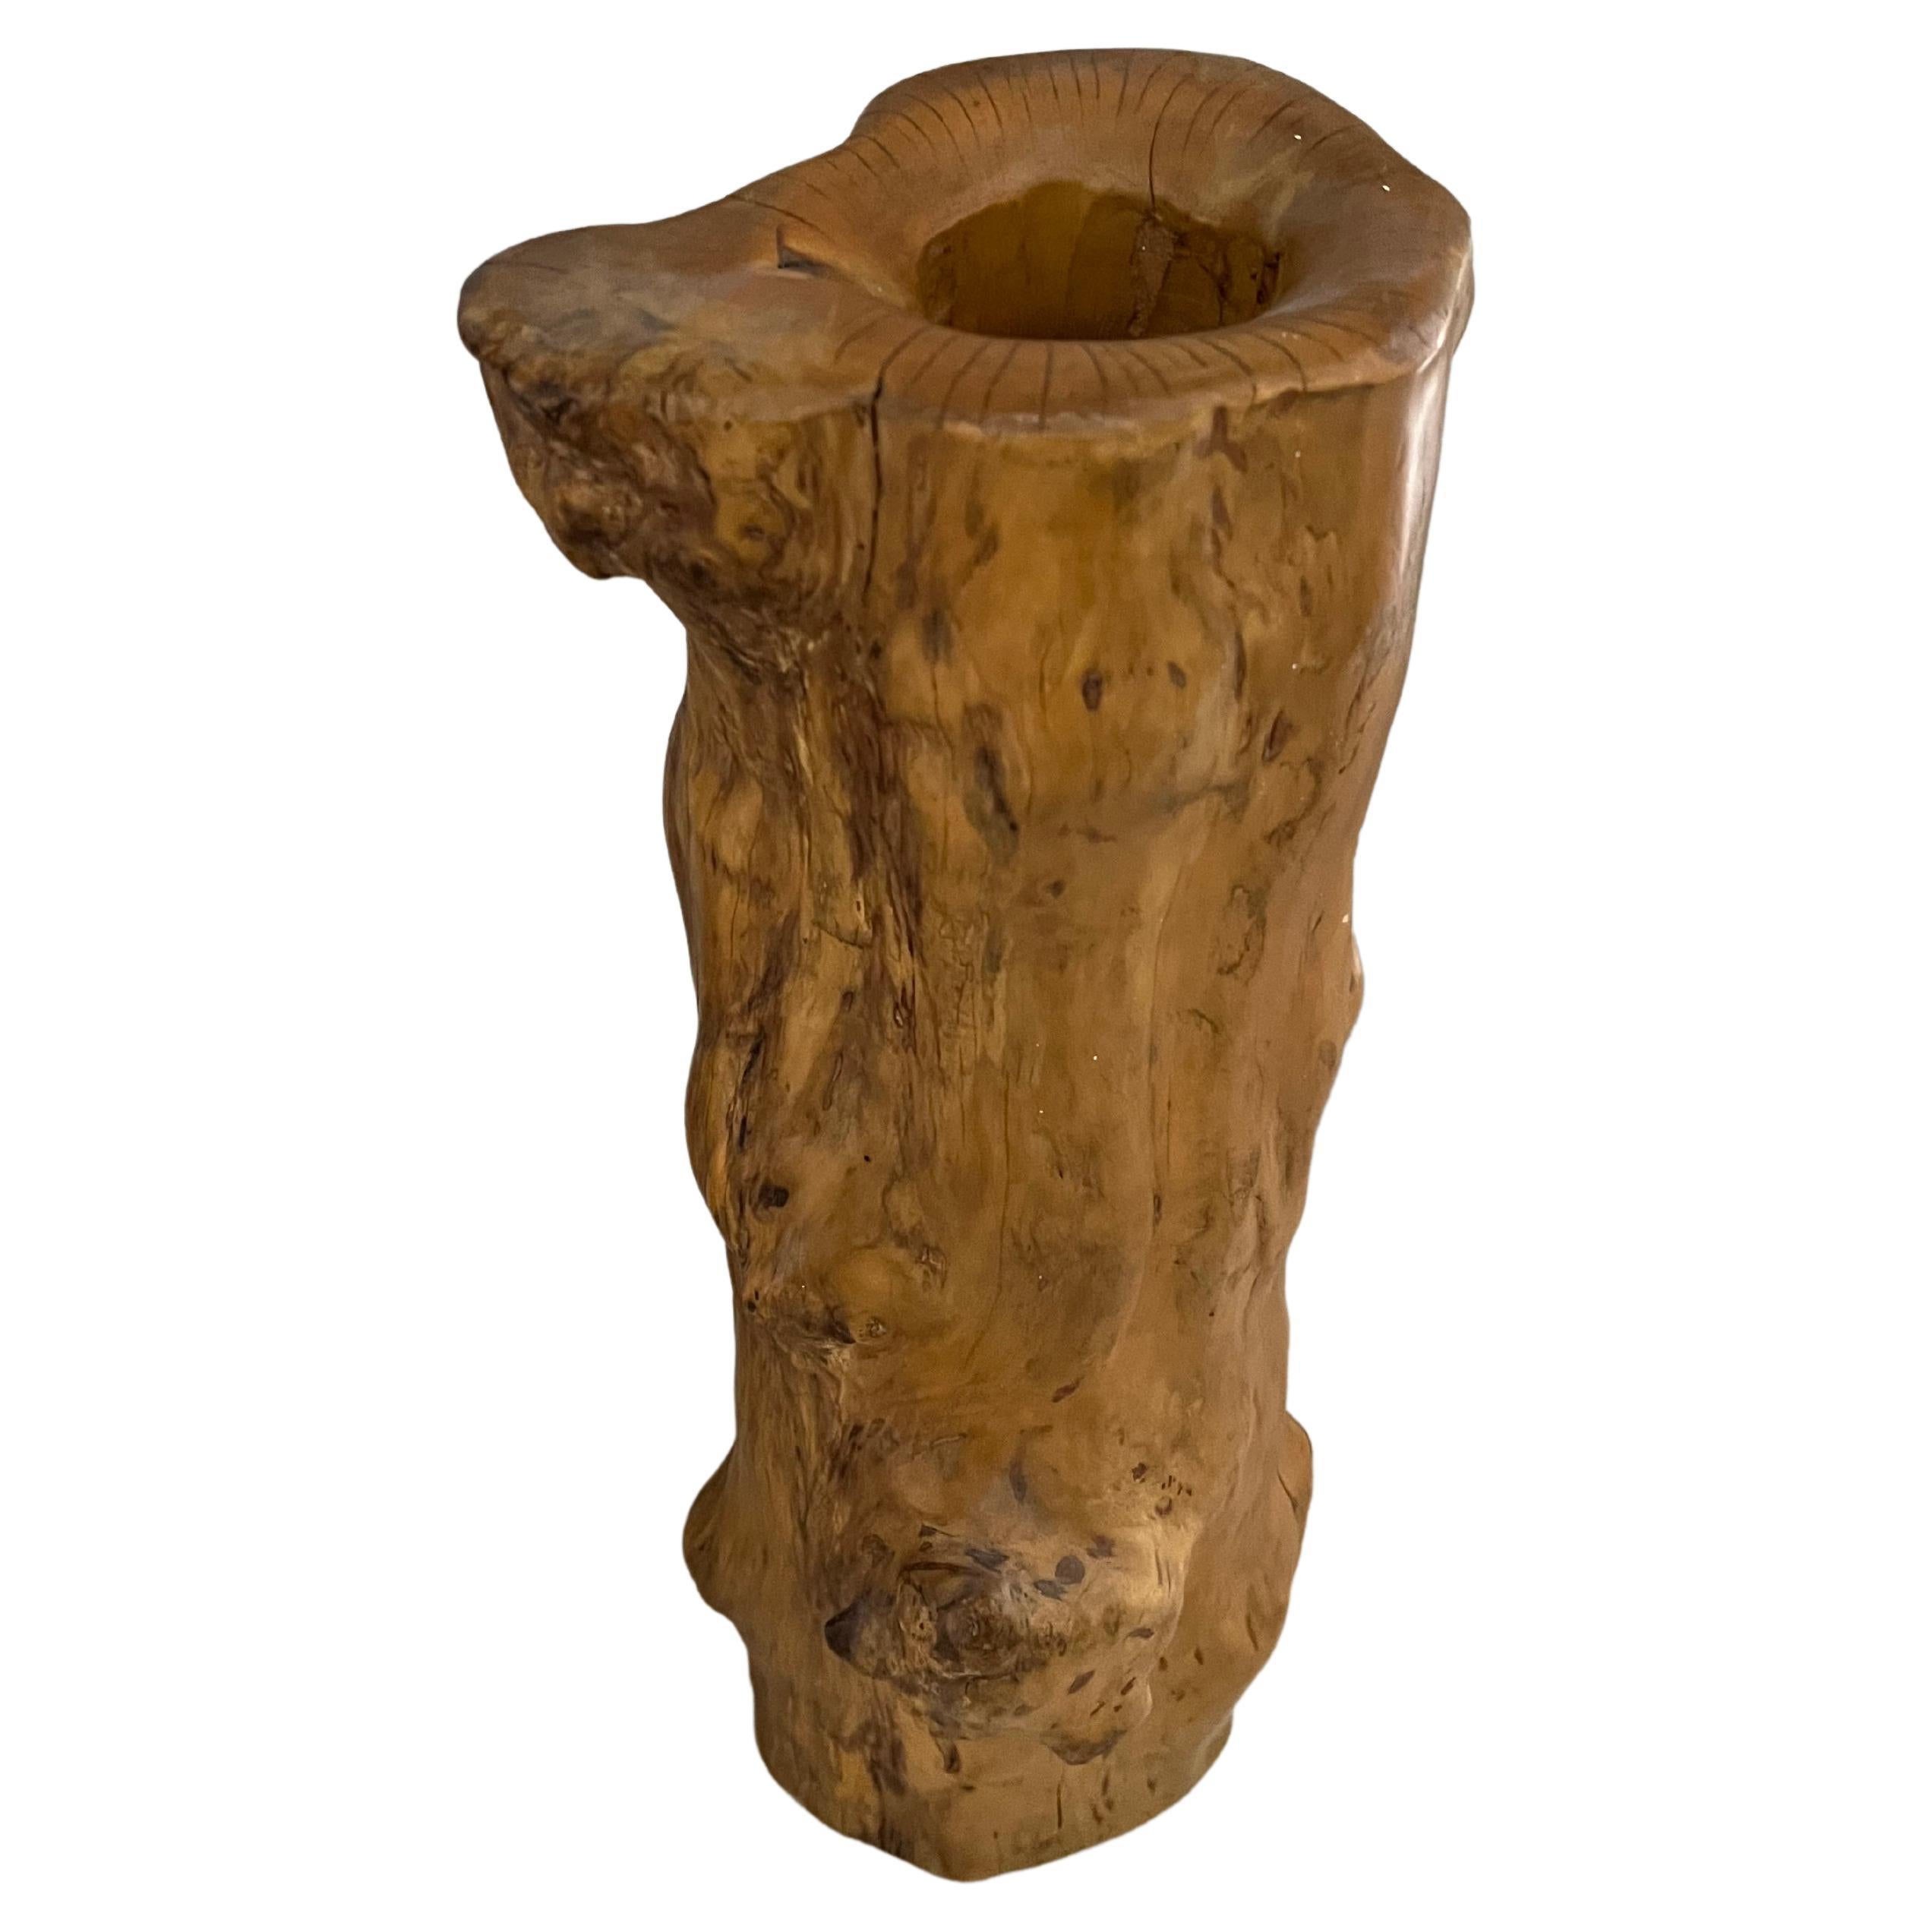 Driftwood Accent Vase or Decorative Piece